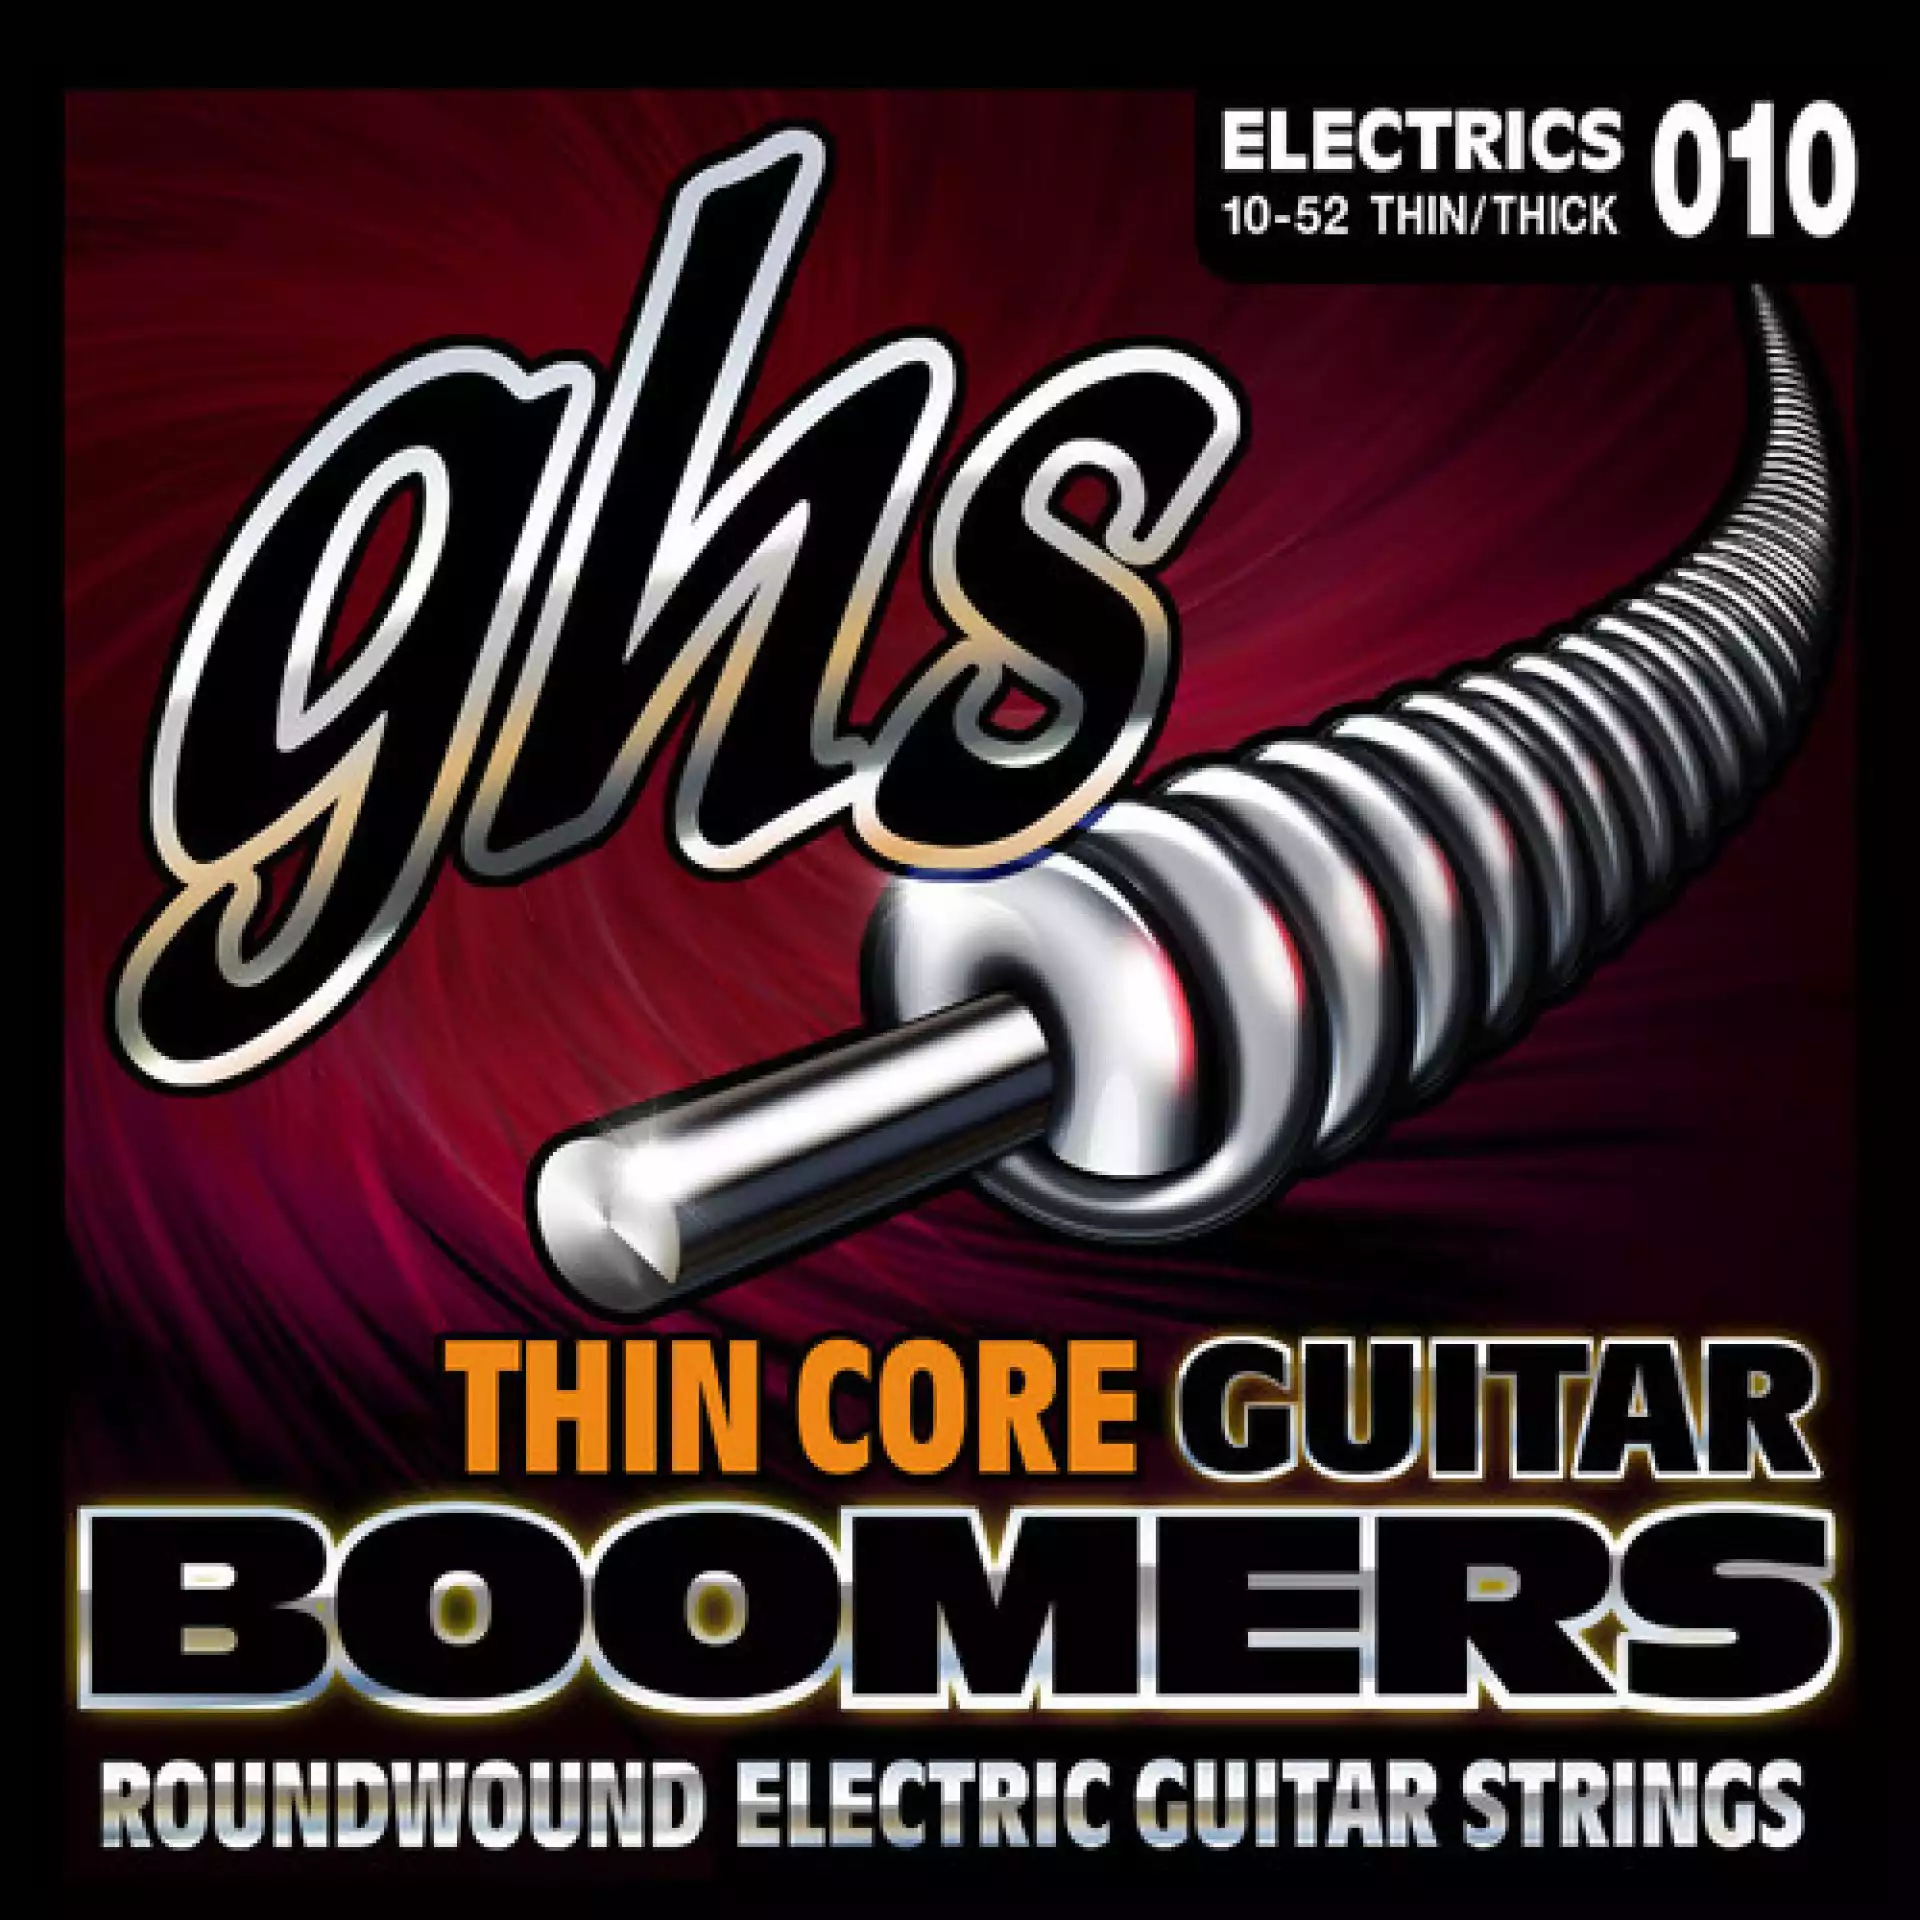 GHS TC-GBTNT Thin Core Boomers Thin-Thick Electric Guitar Strings (6-String Set, 10 - 52)